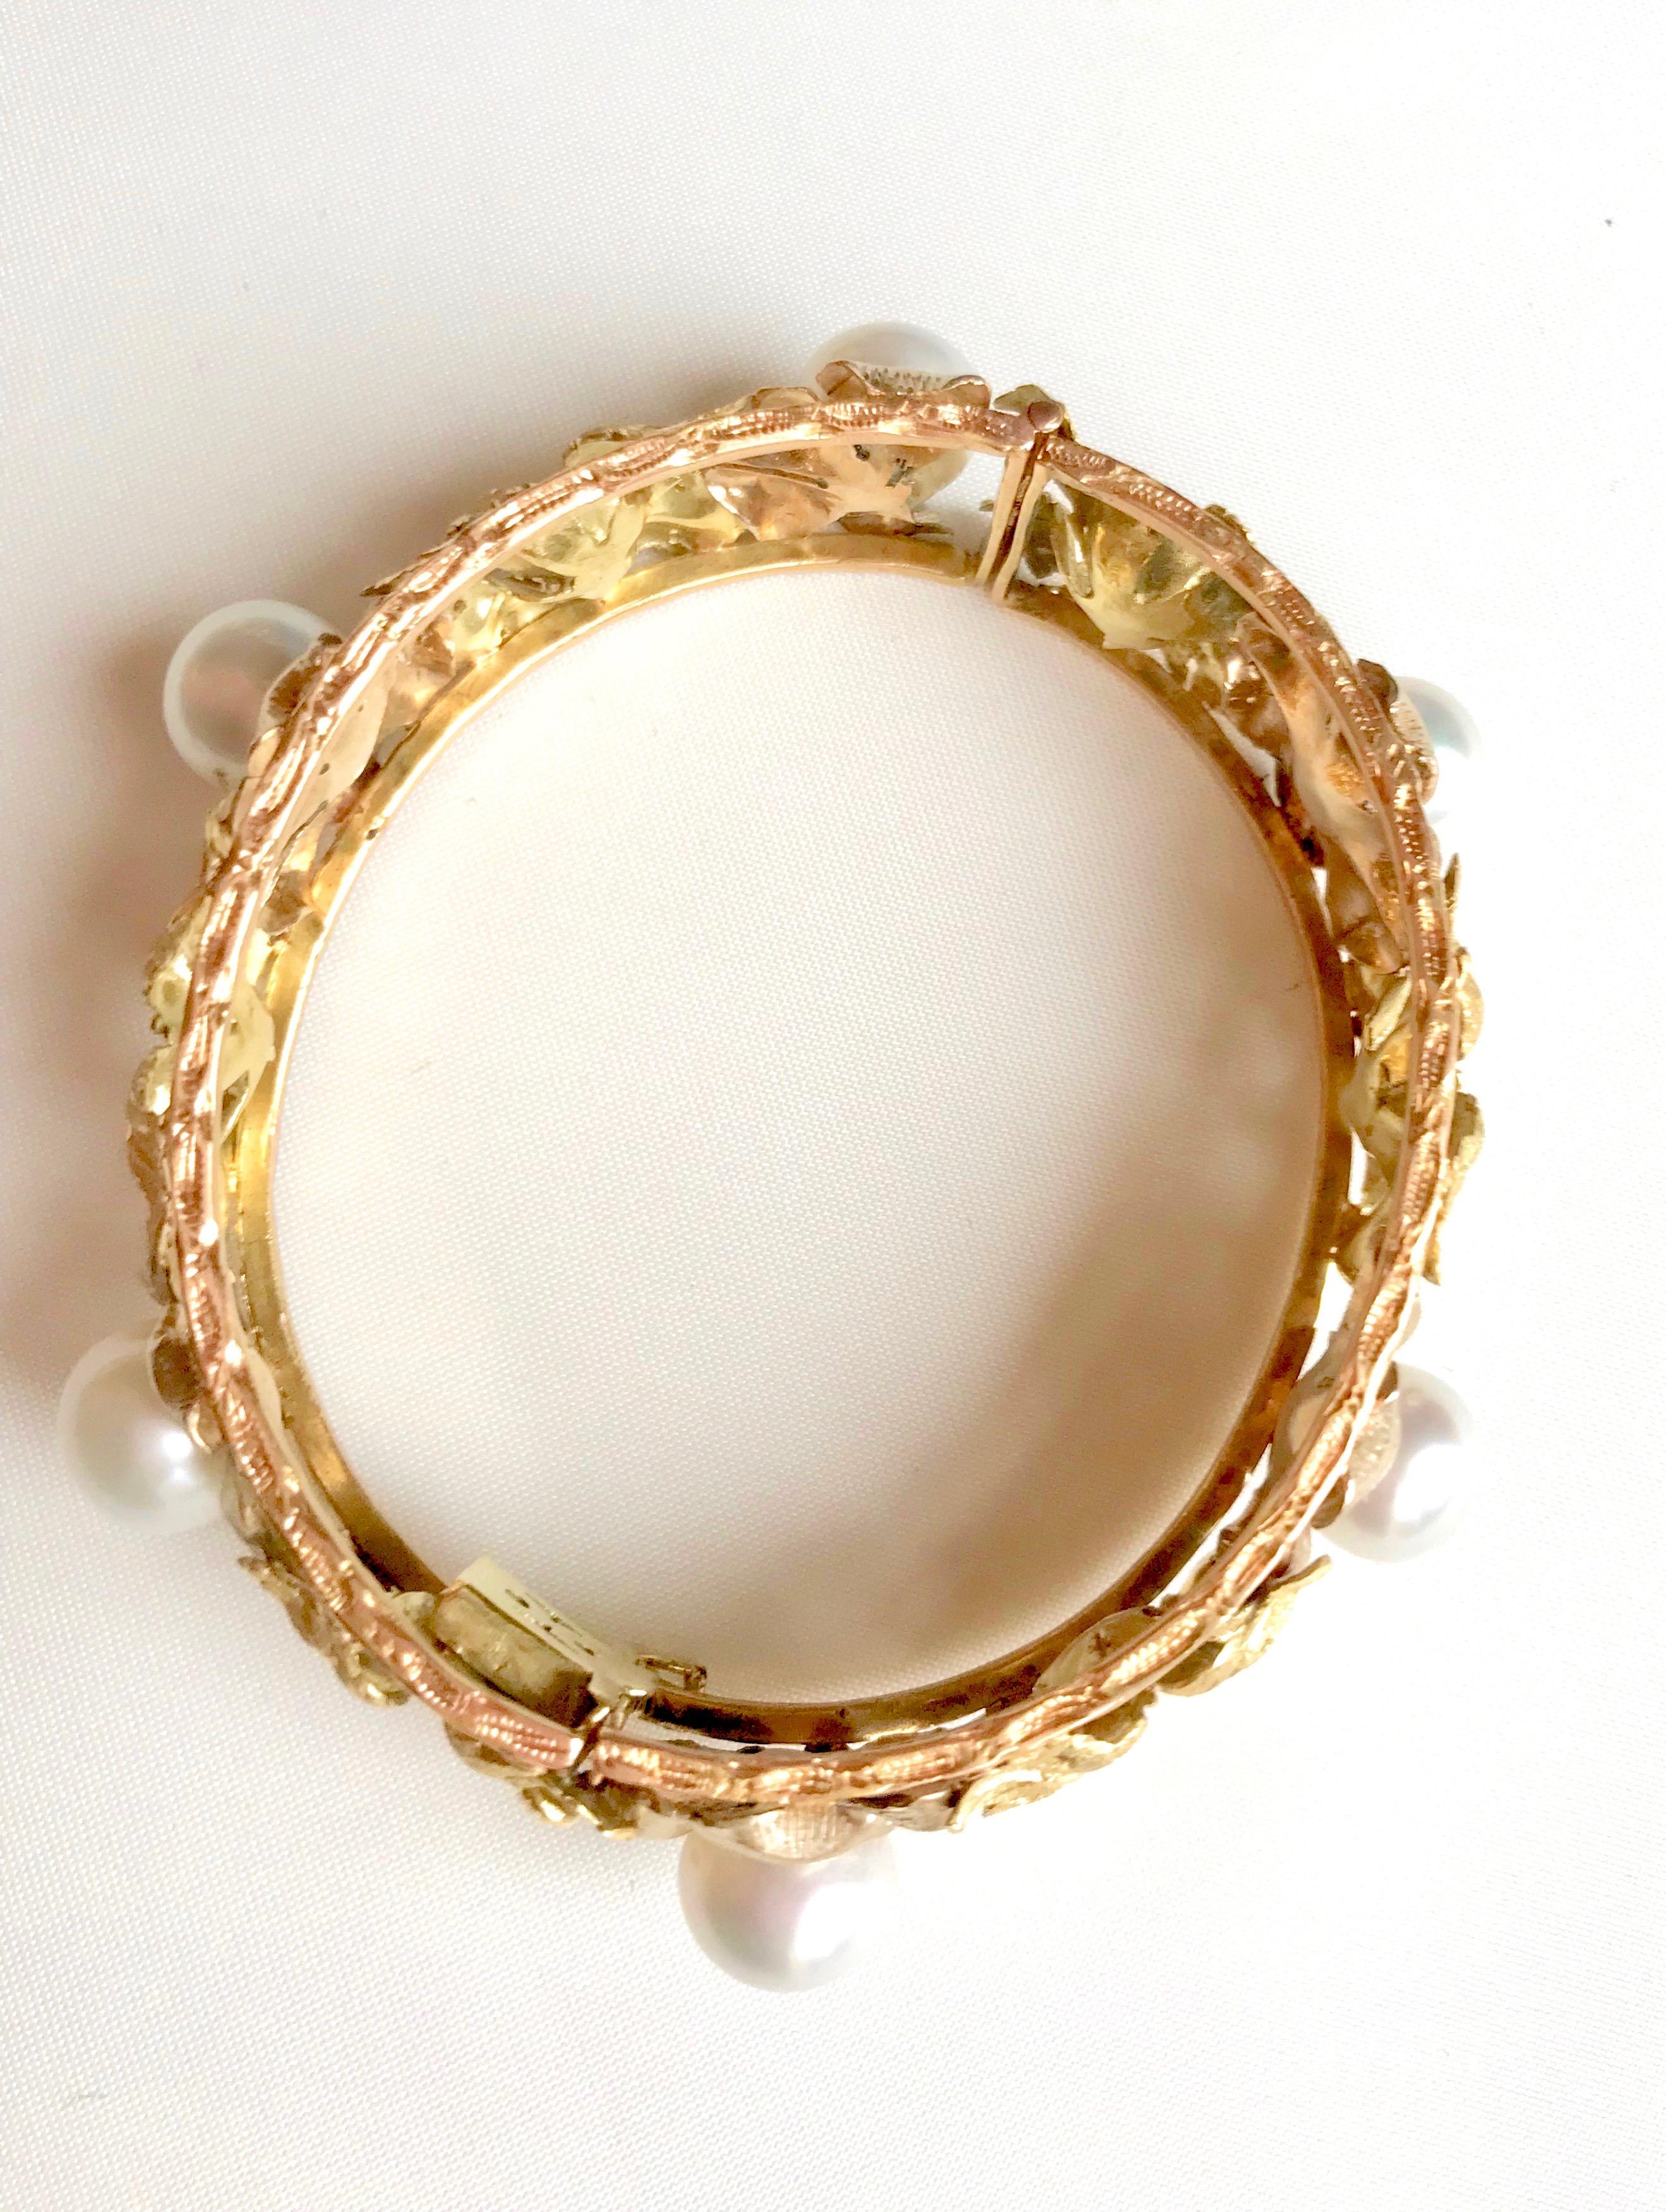 Buccellati Rigid Bracelet Yellow, White and Pink Gold Pearls For Sale 5